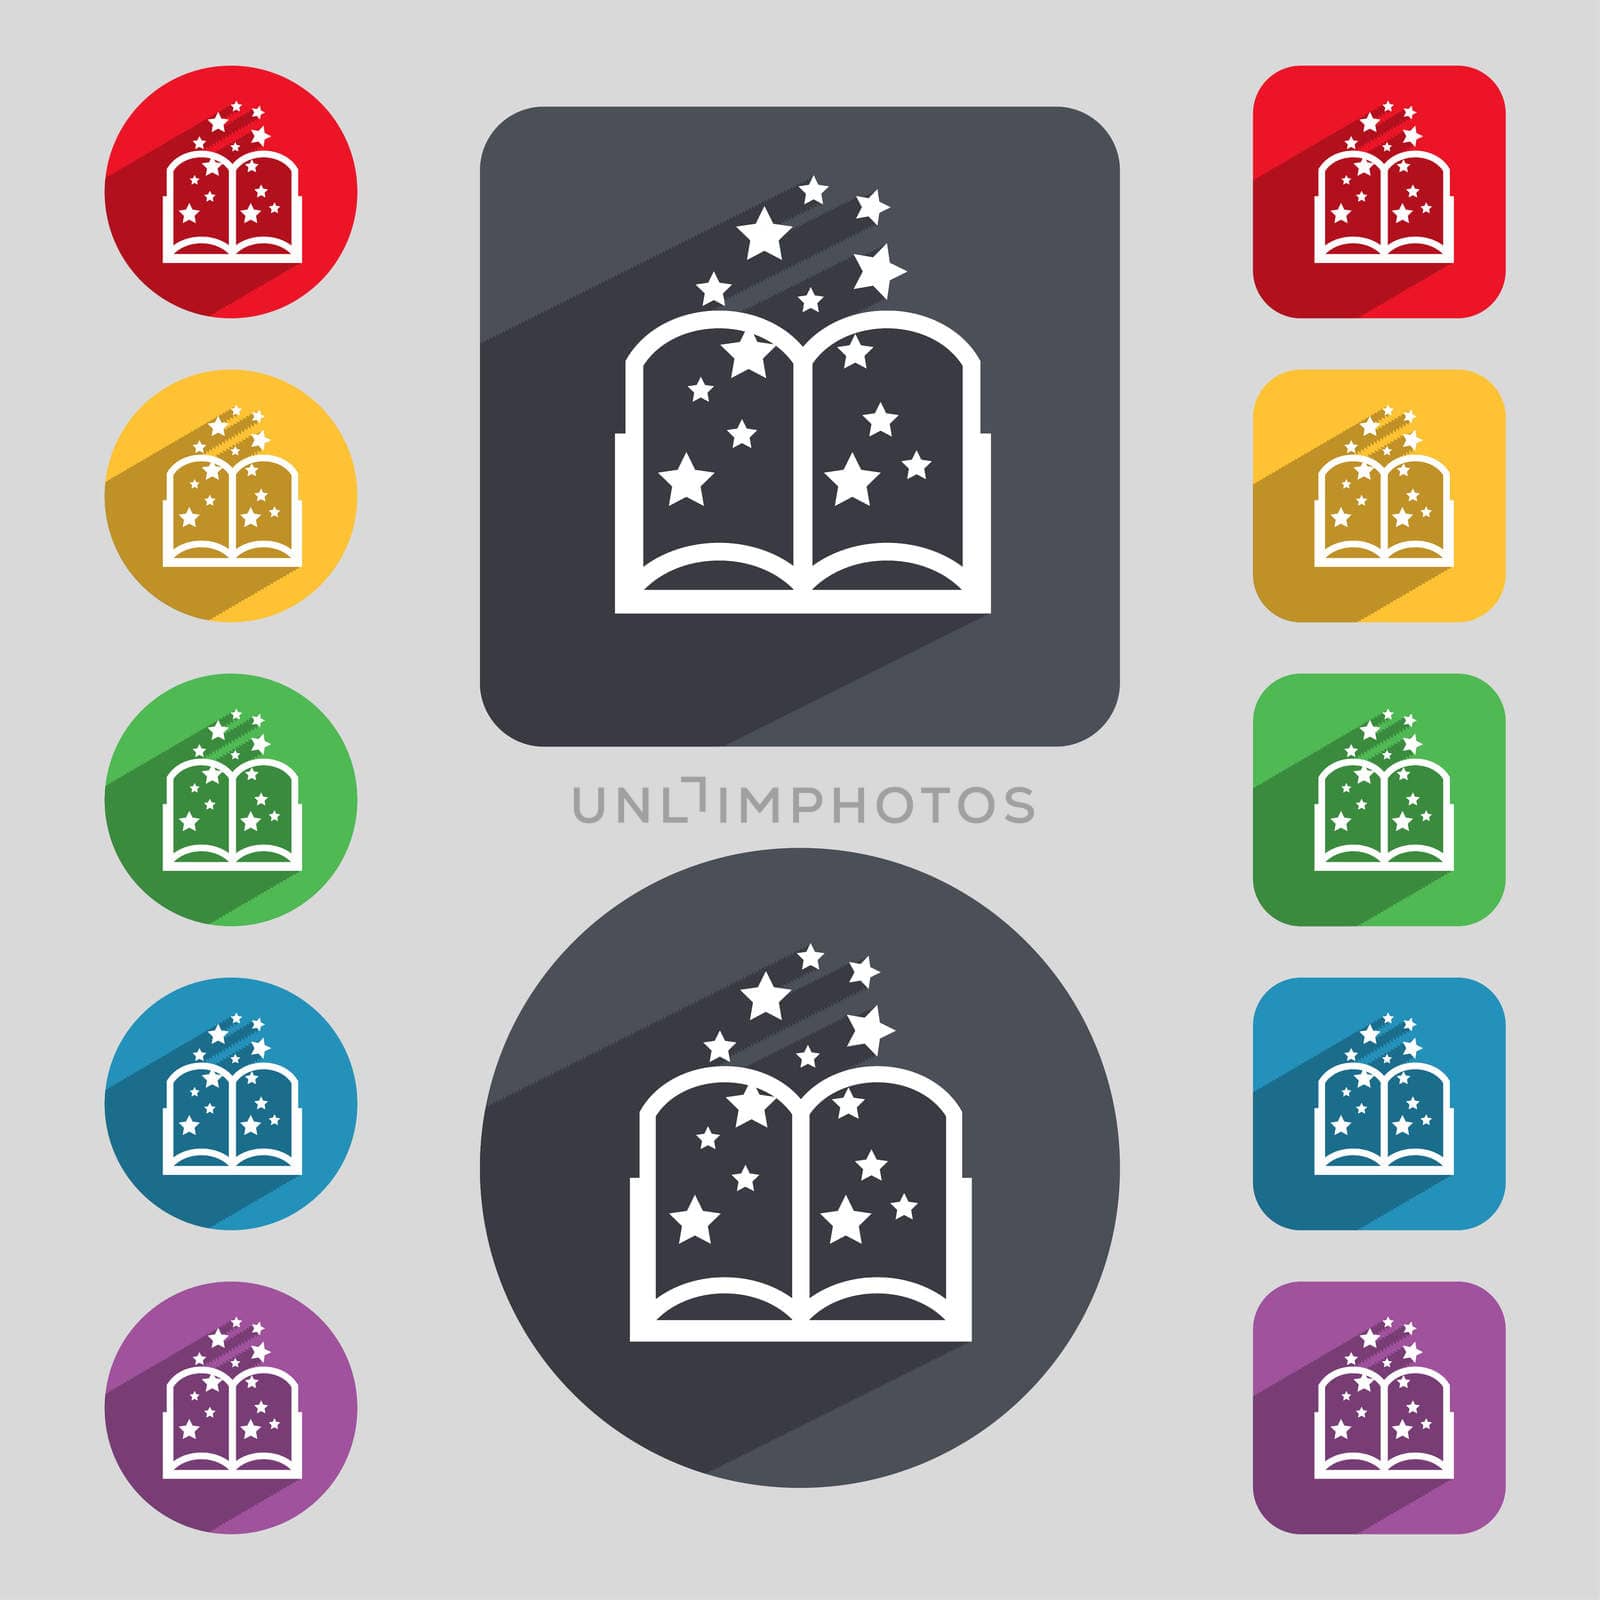 Magic Book sign icon. Open book symbol. Set of colored buttons.  by serhii_lohvyniuk